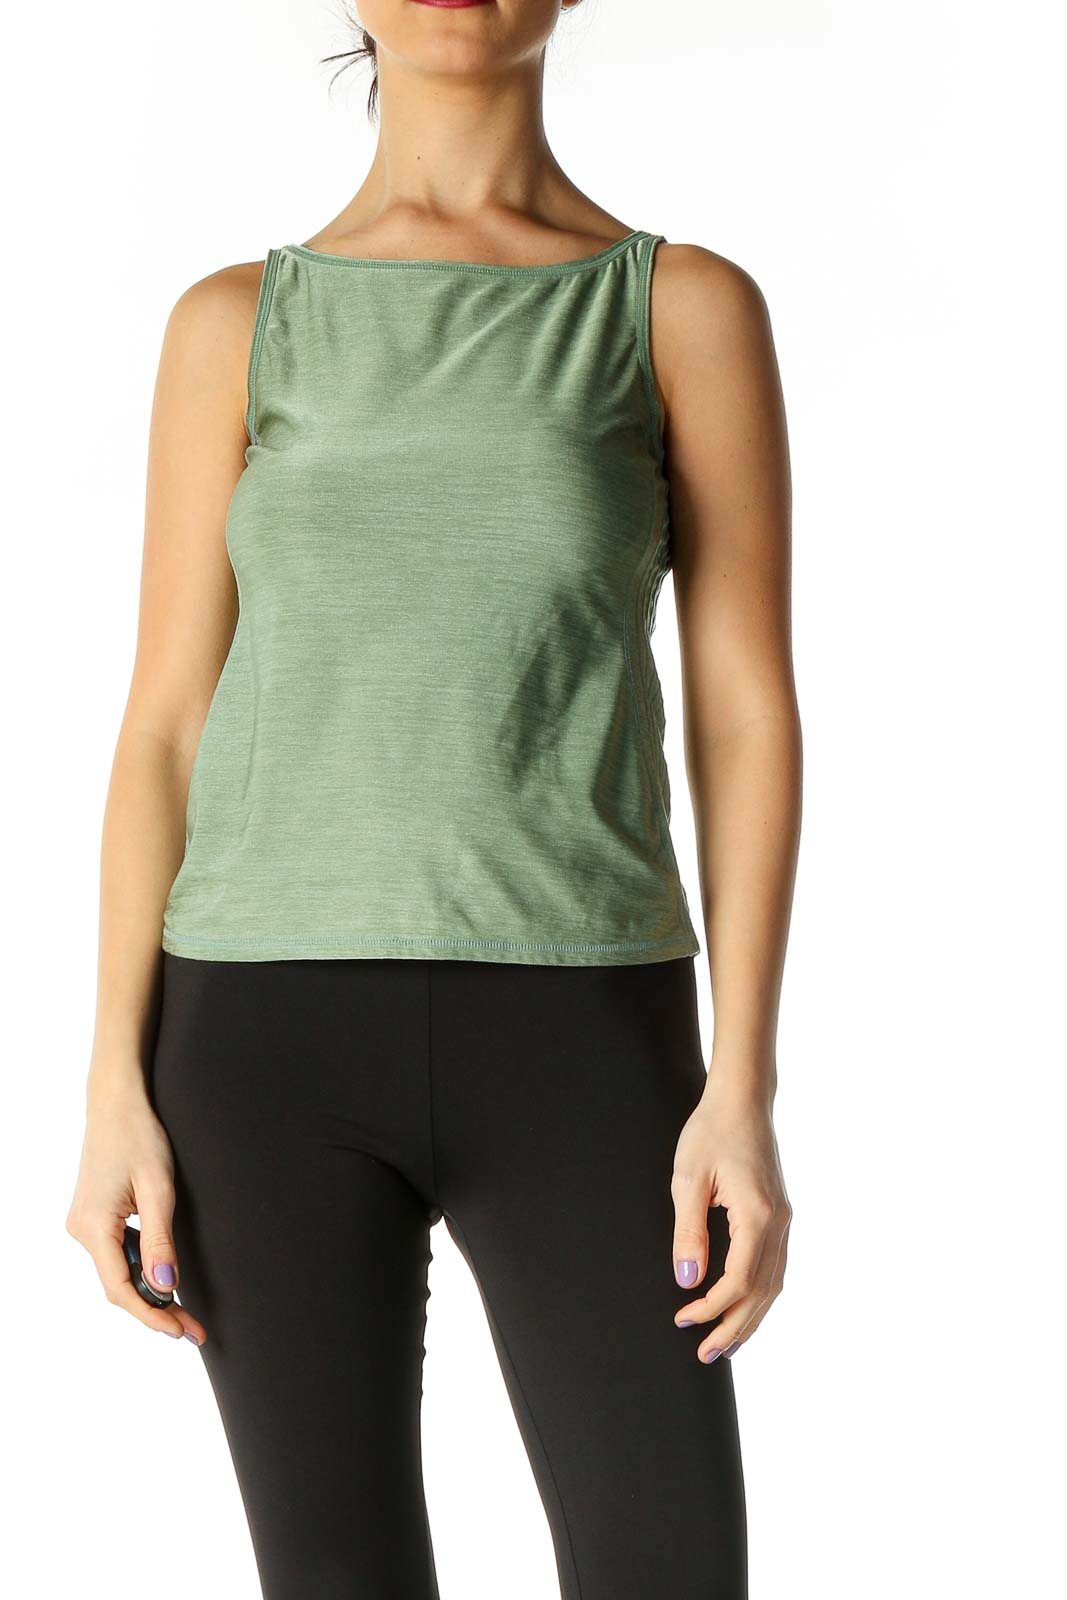 Green Solid Tank Top Front